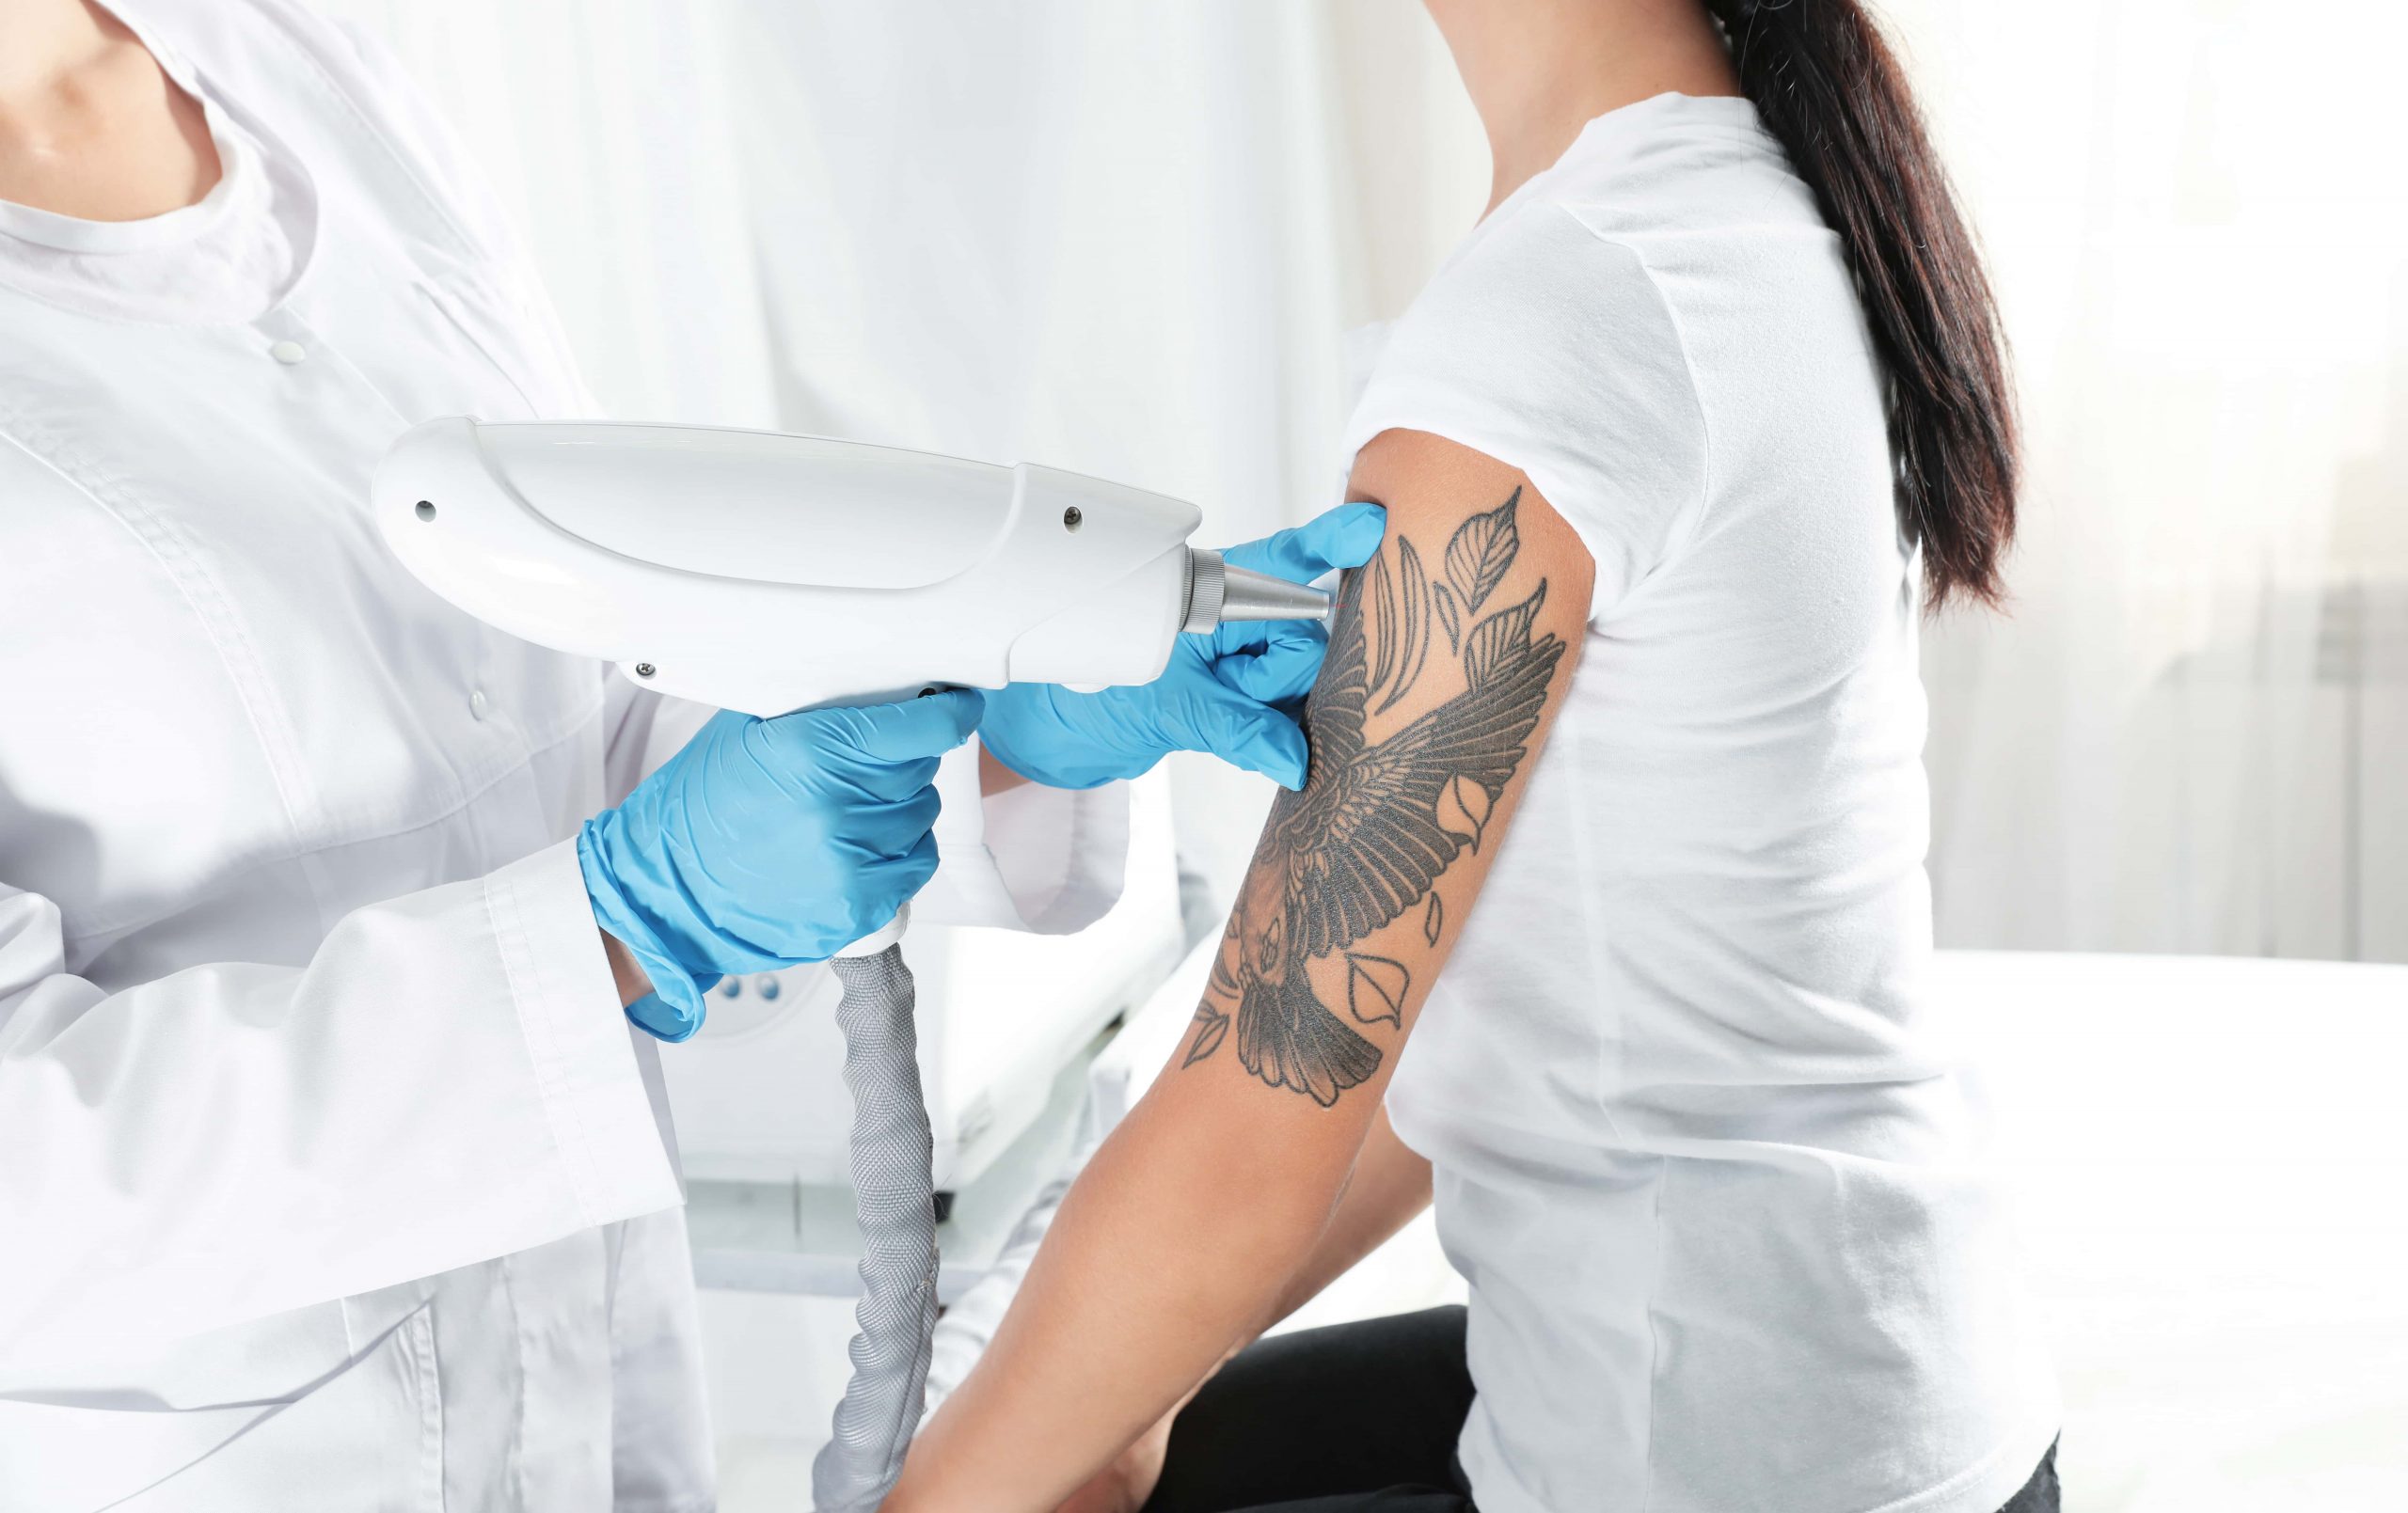 Tattoo Removal: Is laser tattoo removal painful